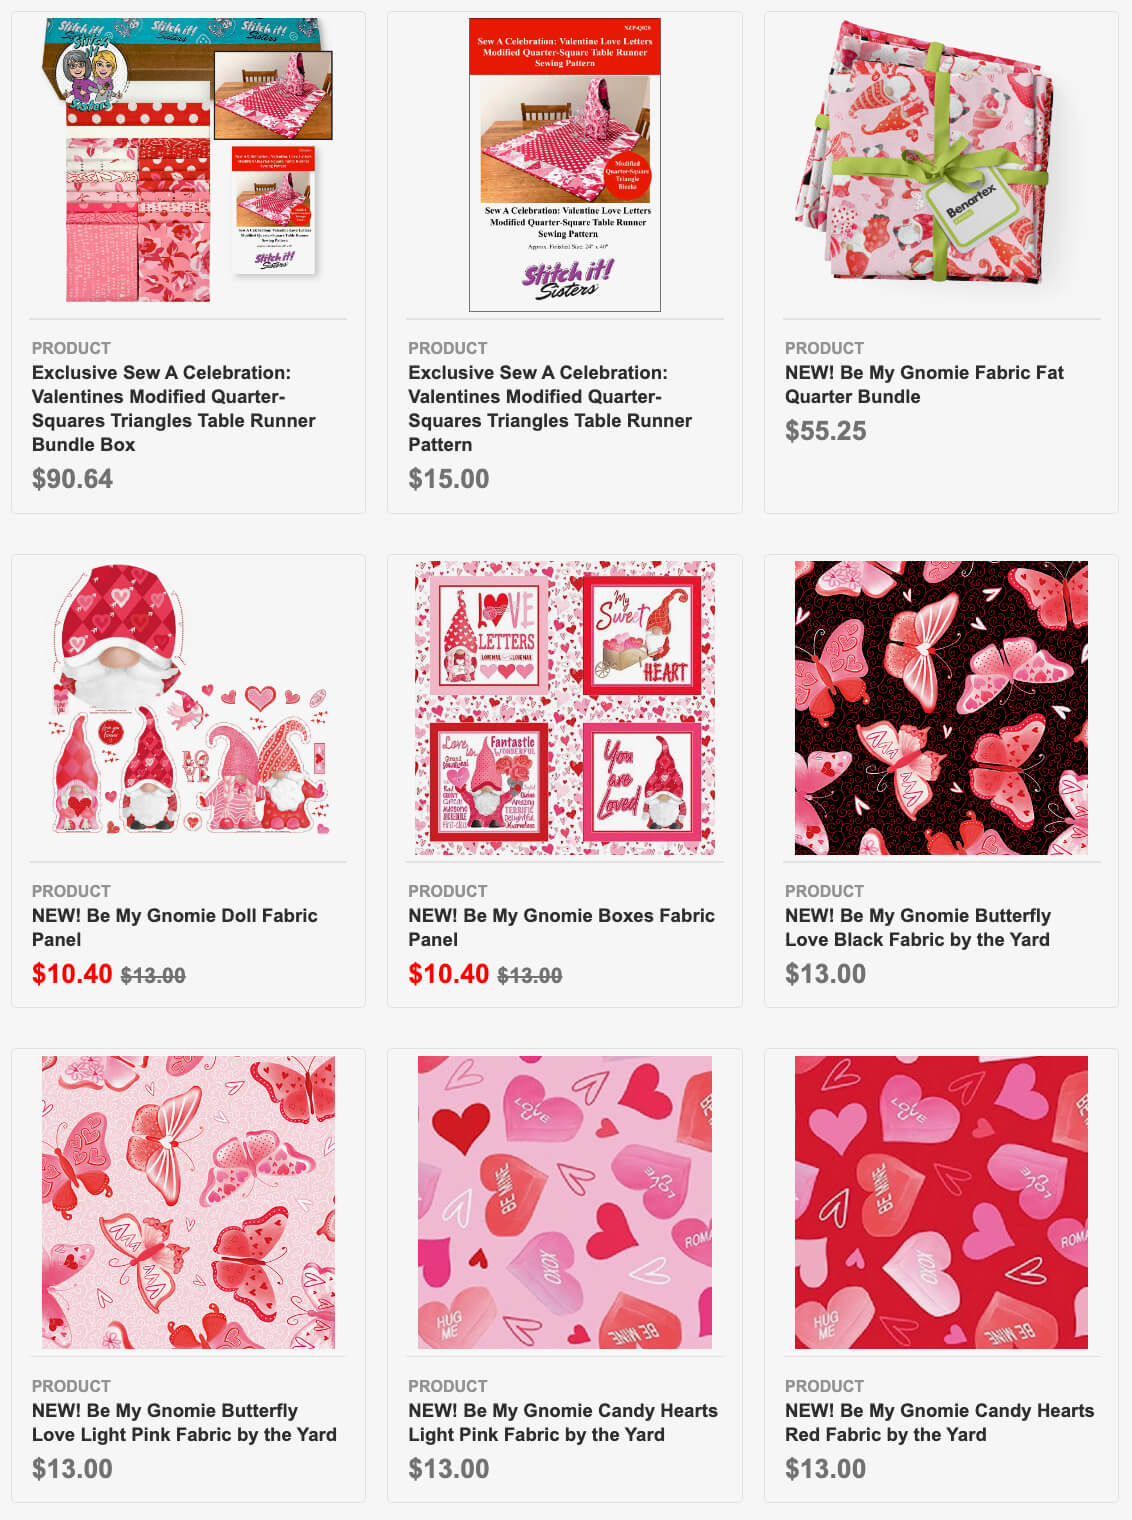 Valentines Day Fabric Available at Nancy Zieman Productions at ShopNZP.com